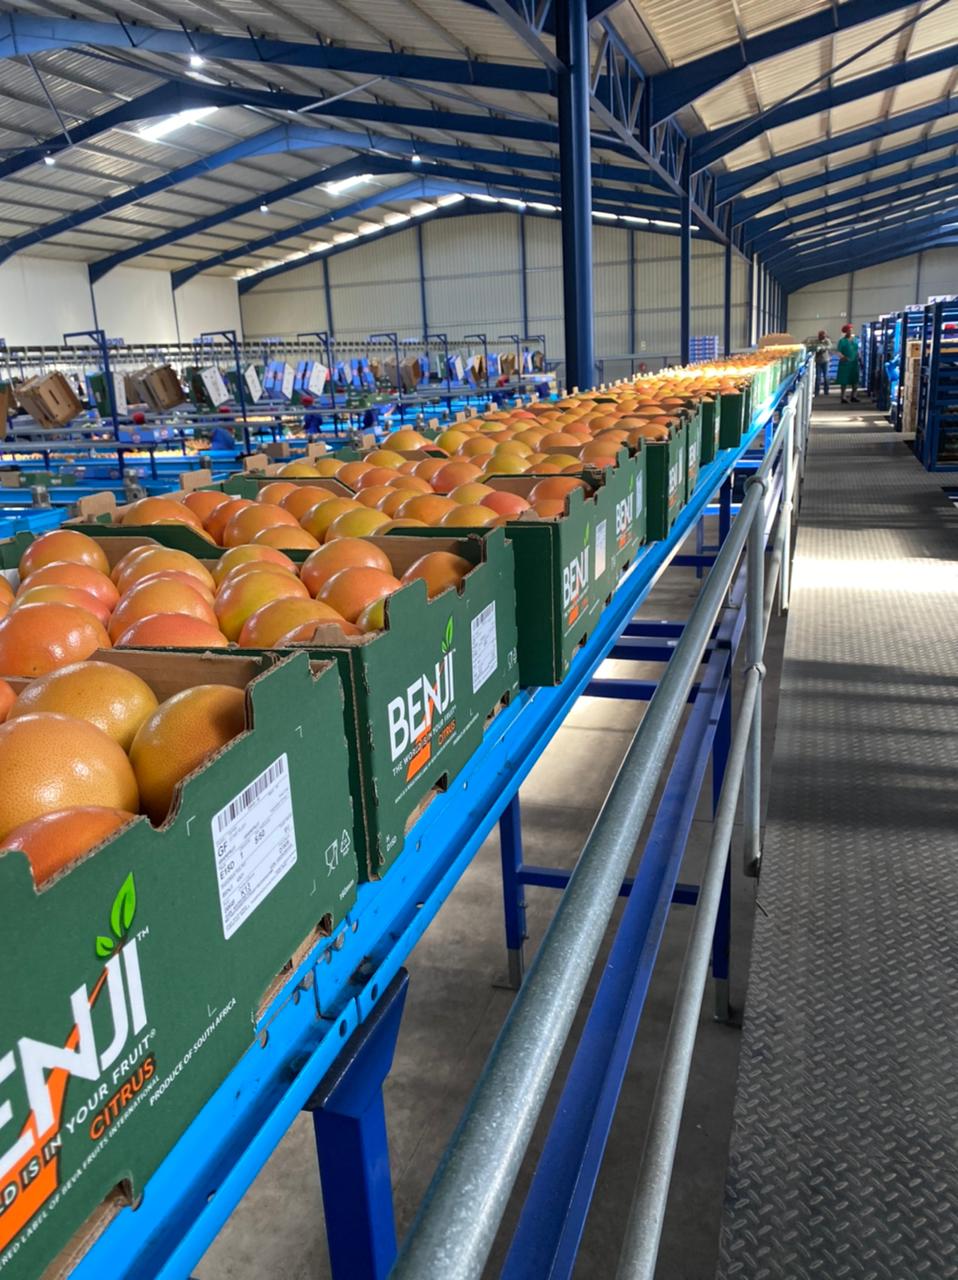 Ruby Grapefruits in South Africa being packed by the Benji label - Beva Fruits International (BFI)